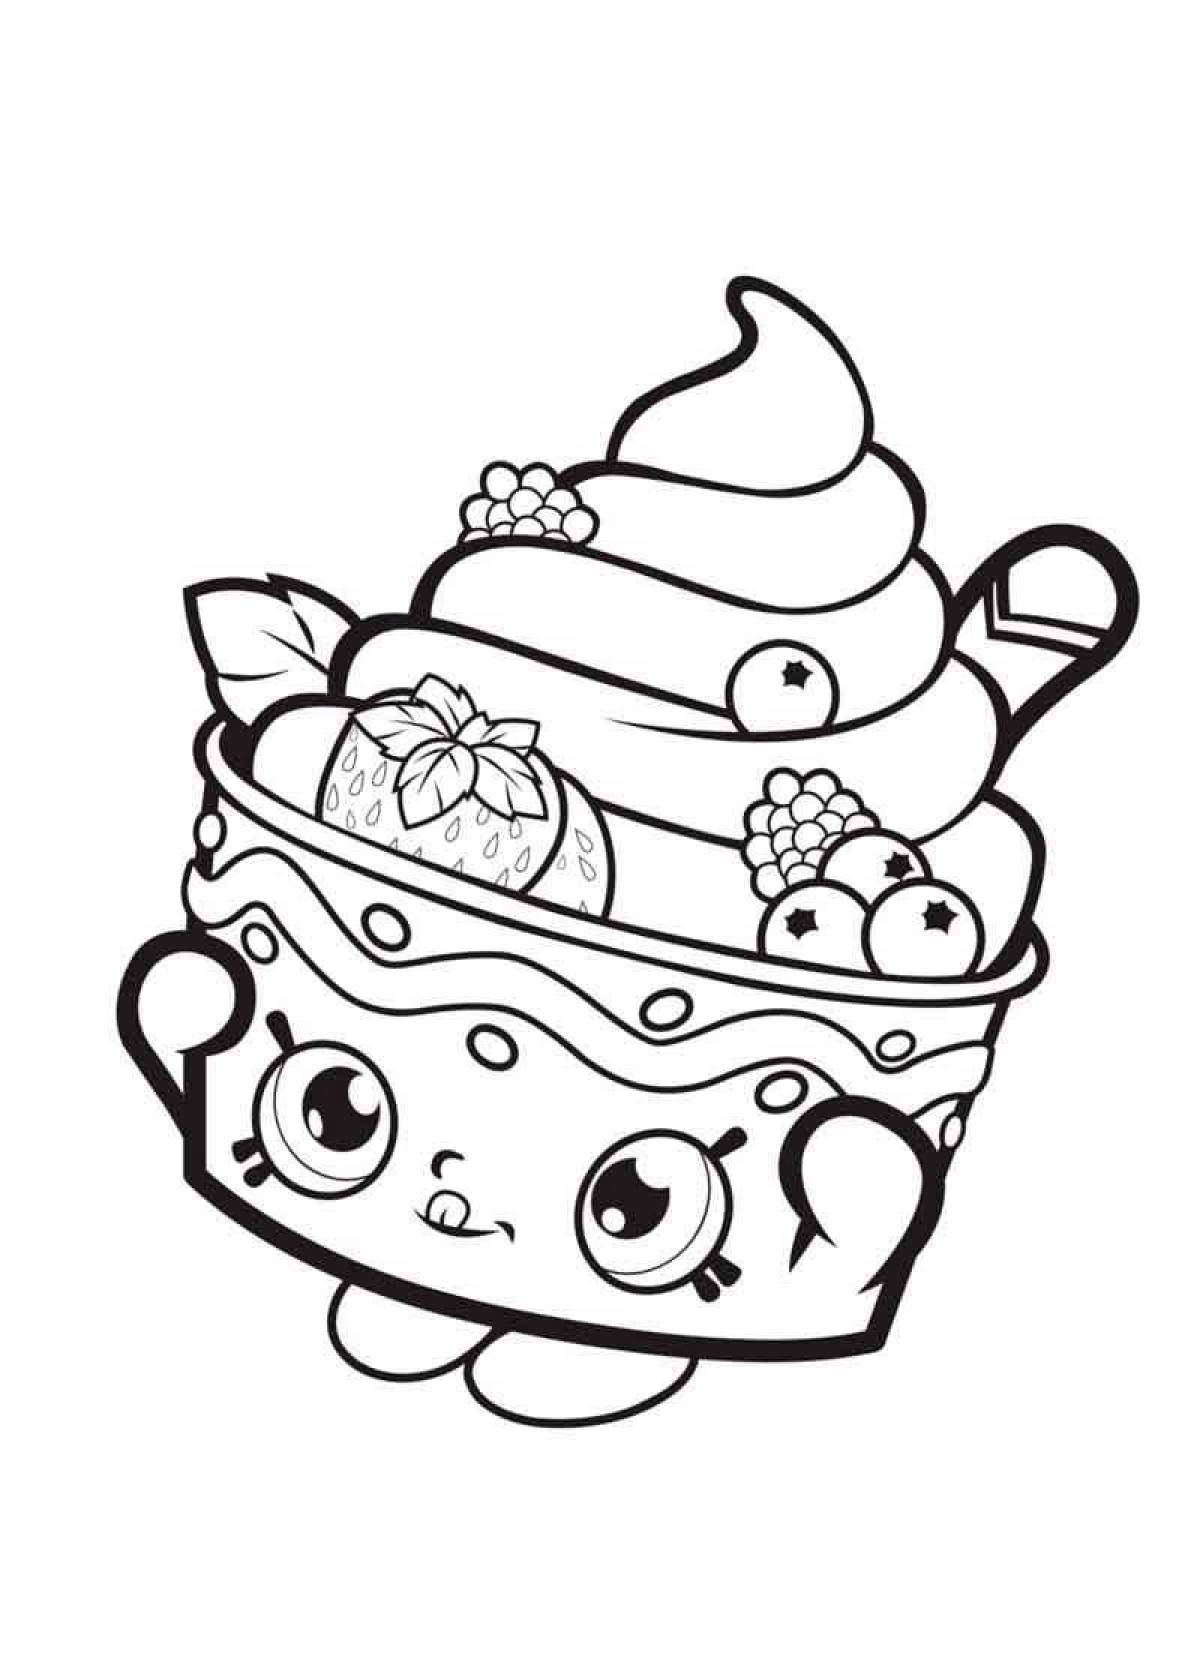 Tasty food coloring page